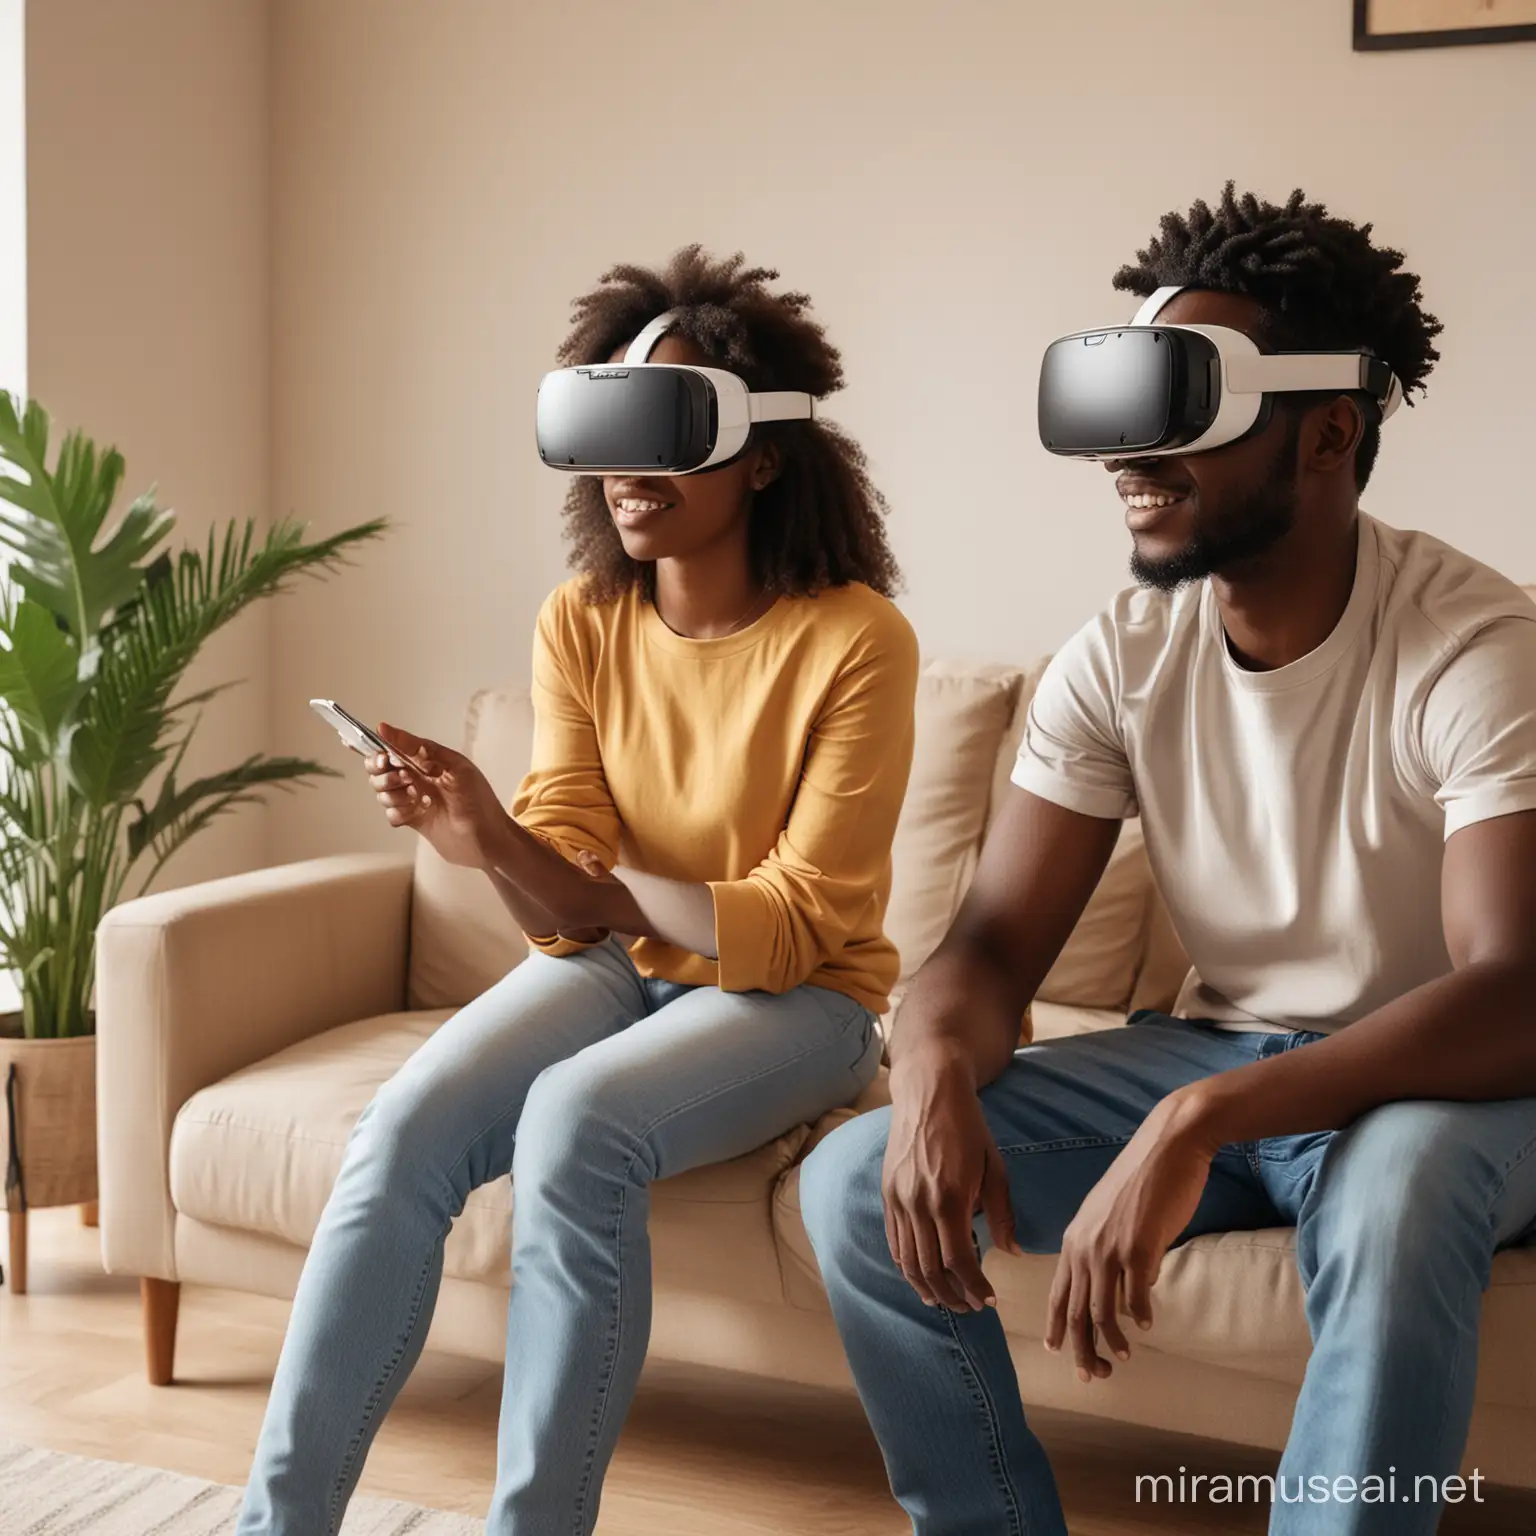 africans people wearing vr glasses in their house 